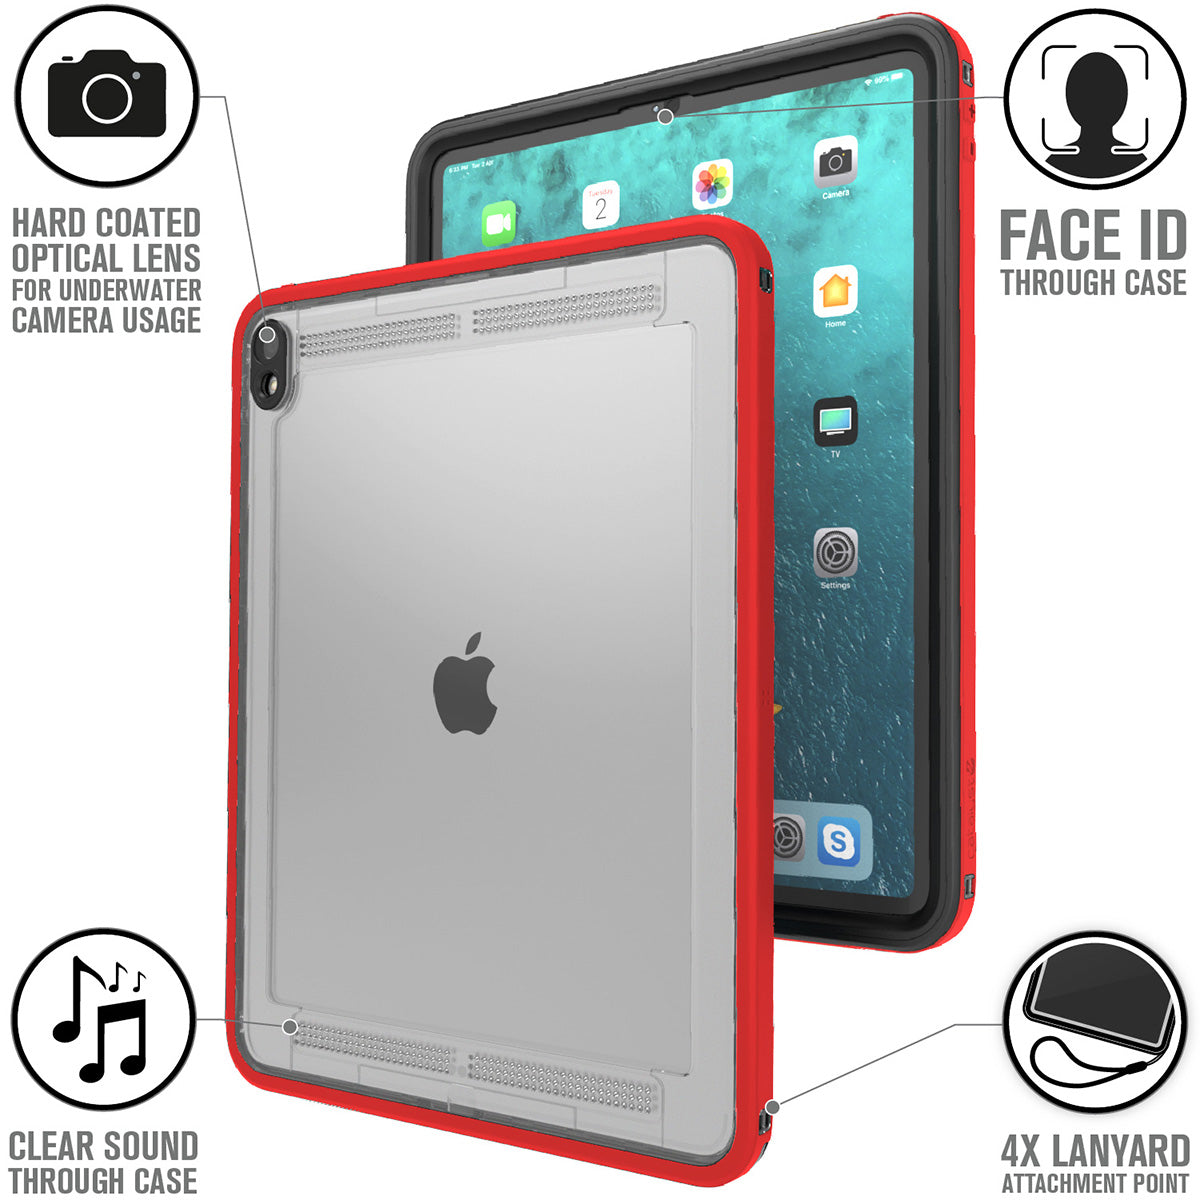 Catalyst waterproof case for ipad pro gen 3 12.9in red-clear sound faceid through case shows attachment points Text reads hard coated optical lens for underwater camera usage Face Id thorugh case clear sound through case 4x lanyard attachment point